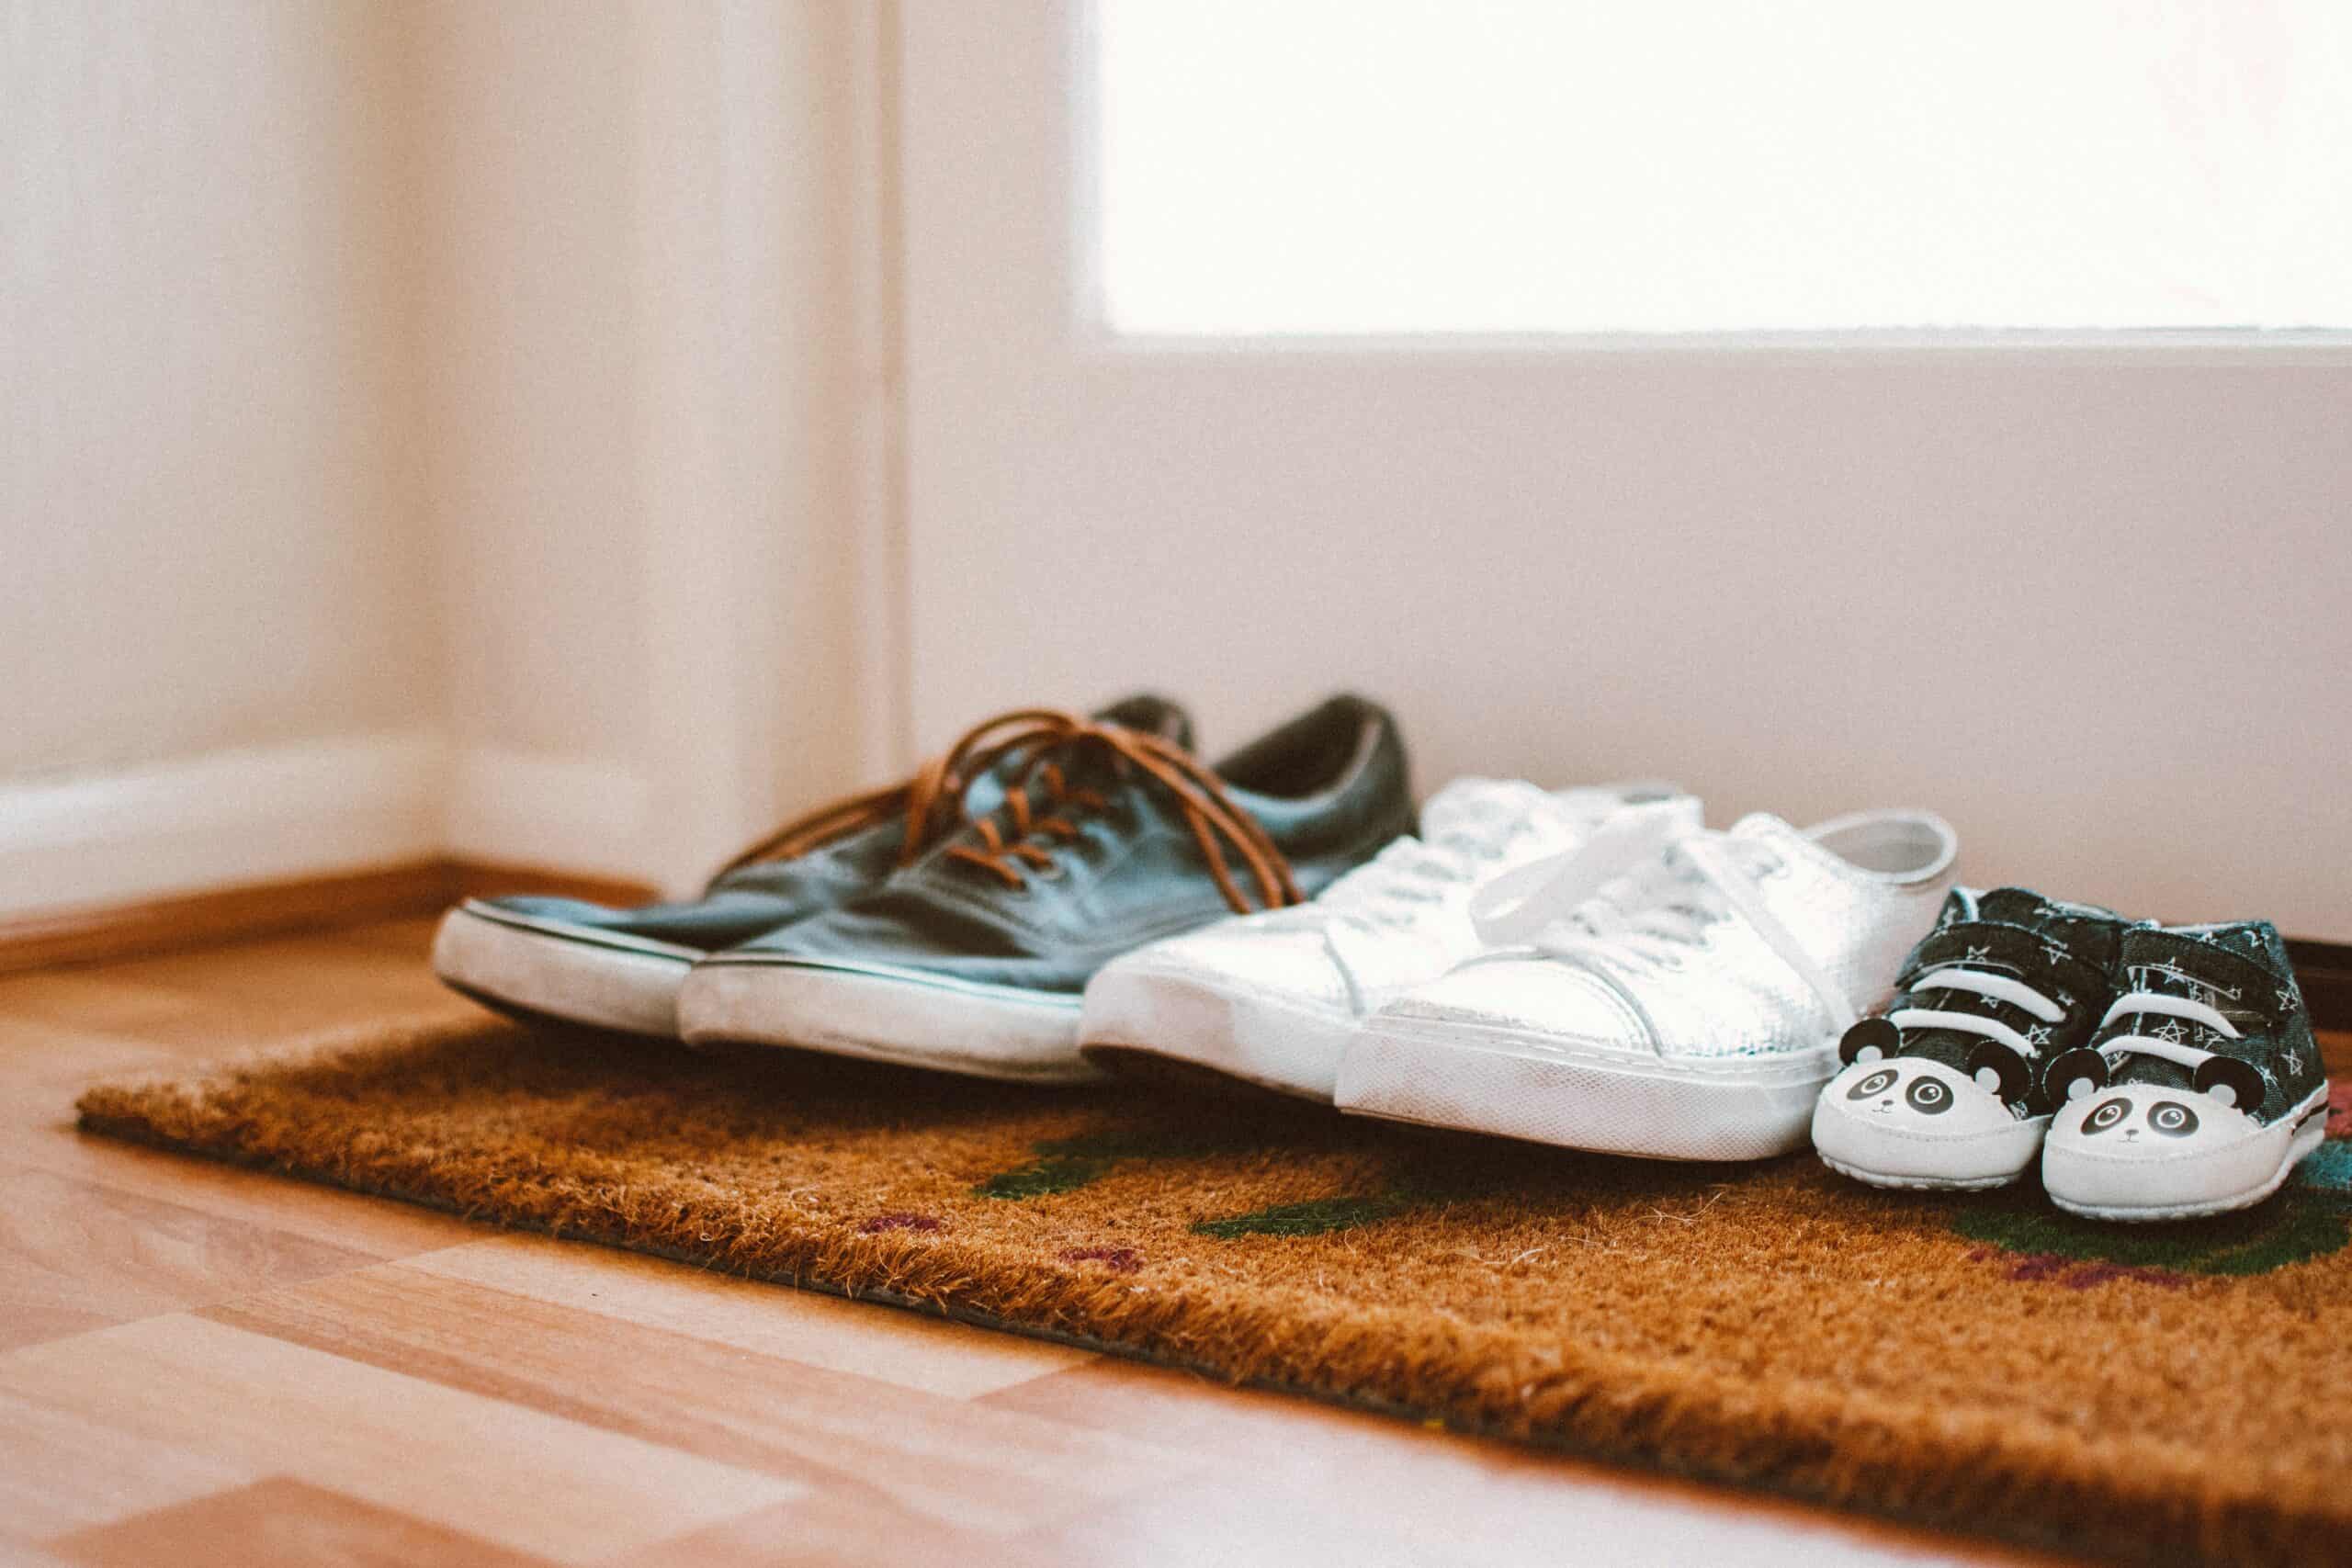 Ways To Get the Smell Out of Shoes